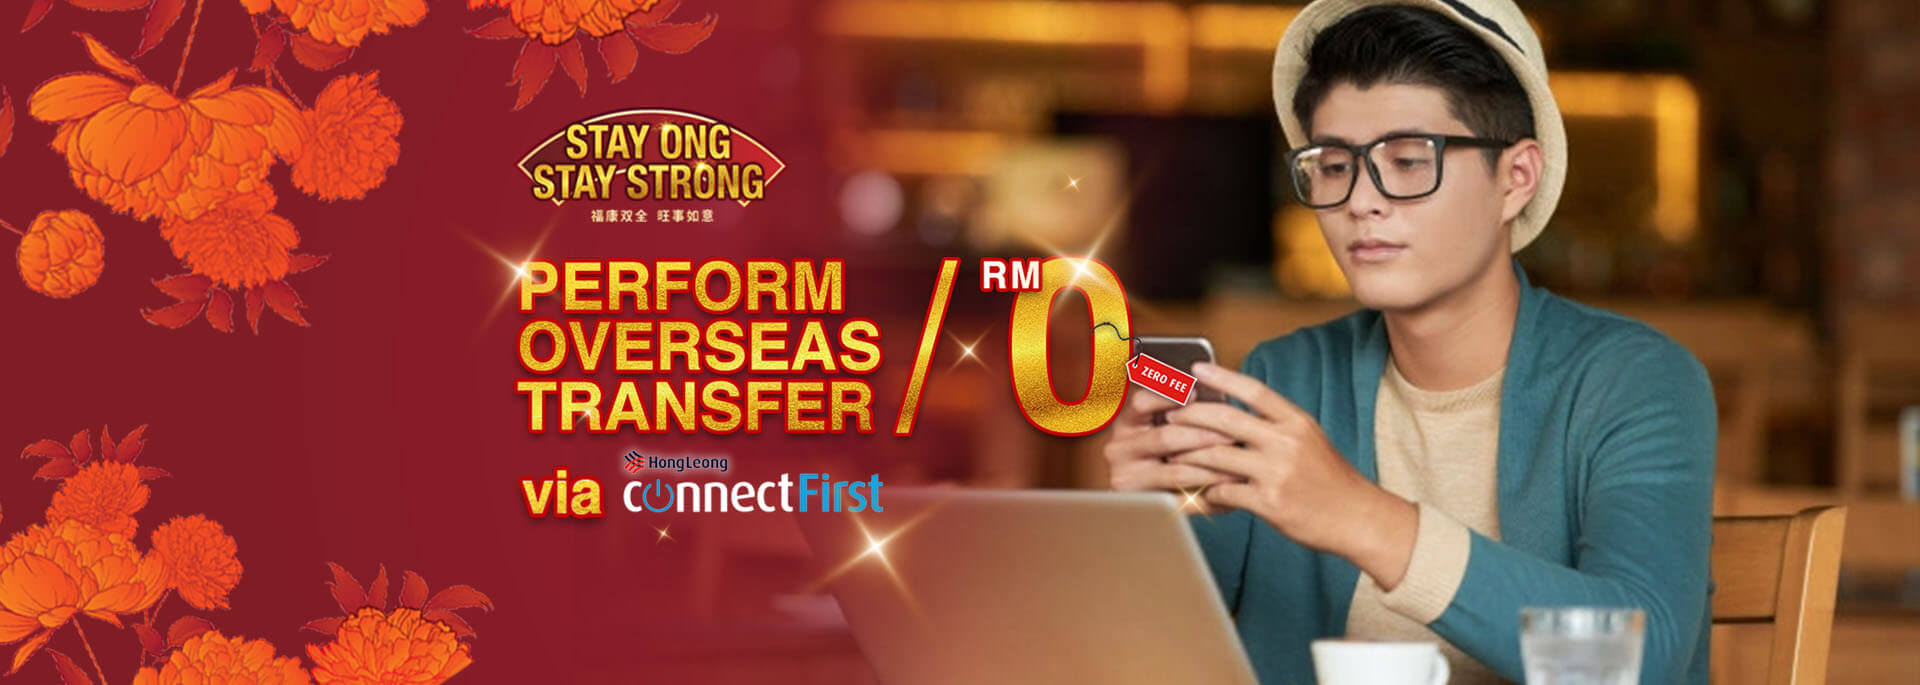 Foreign Telegraphic Transfers at RM0 fee